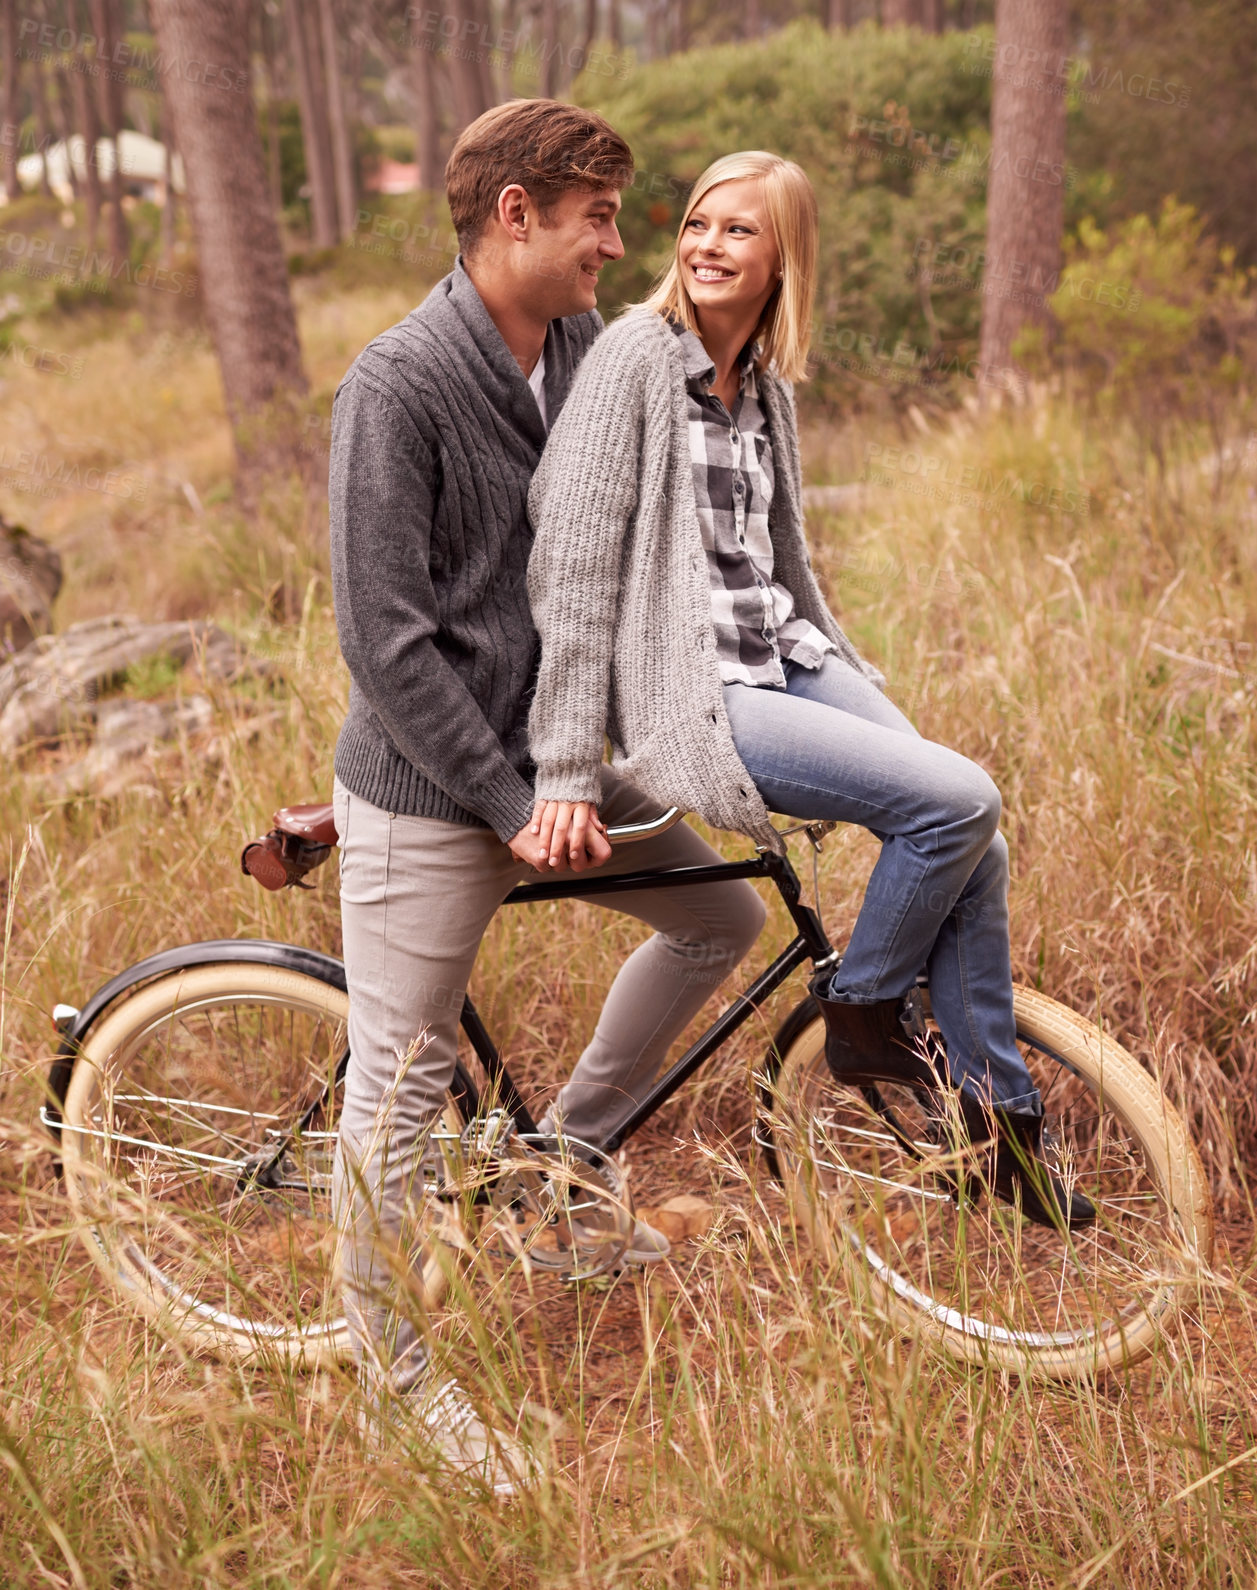 Buy stock photo A young couple enjoying a bike ride outdoors together